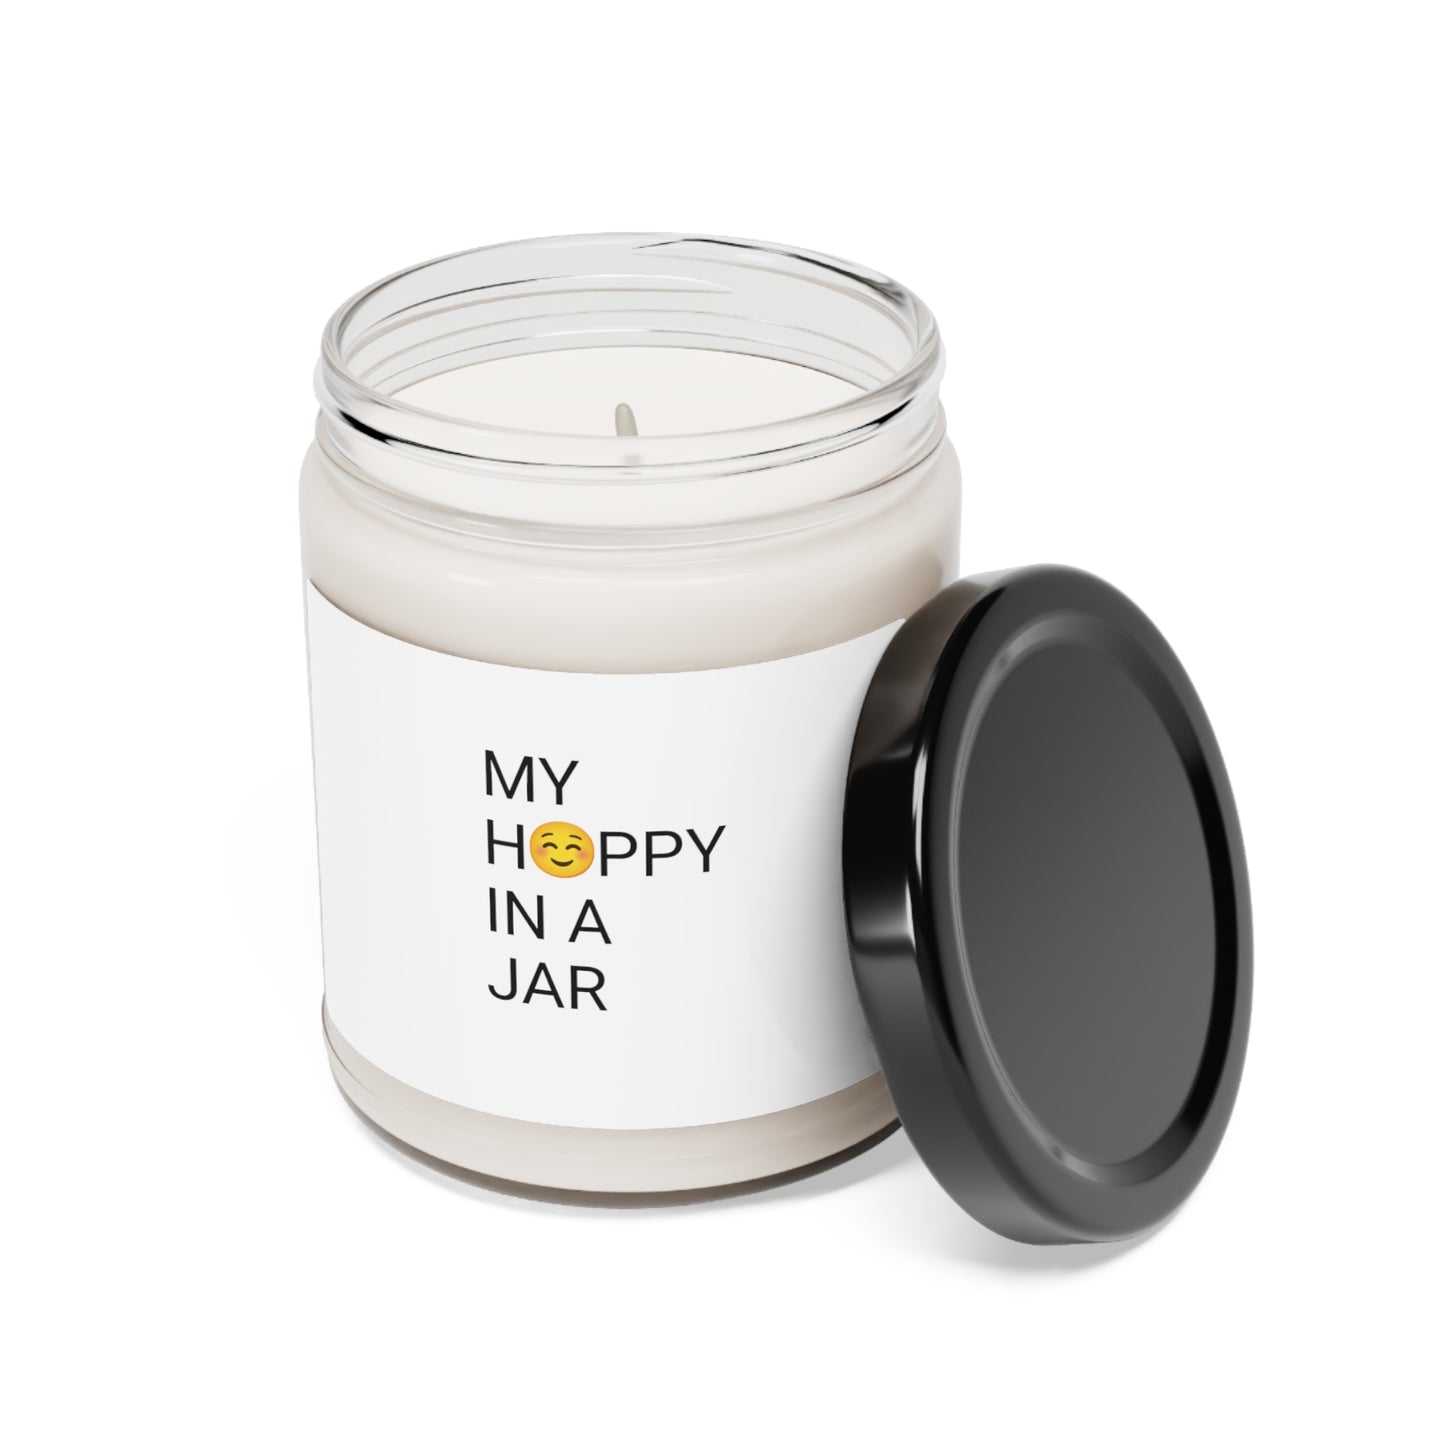 BOSS LADY DENEQUIA " MY HAPPY IN A JAR " Scented Soy Candle, 9oz